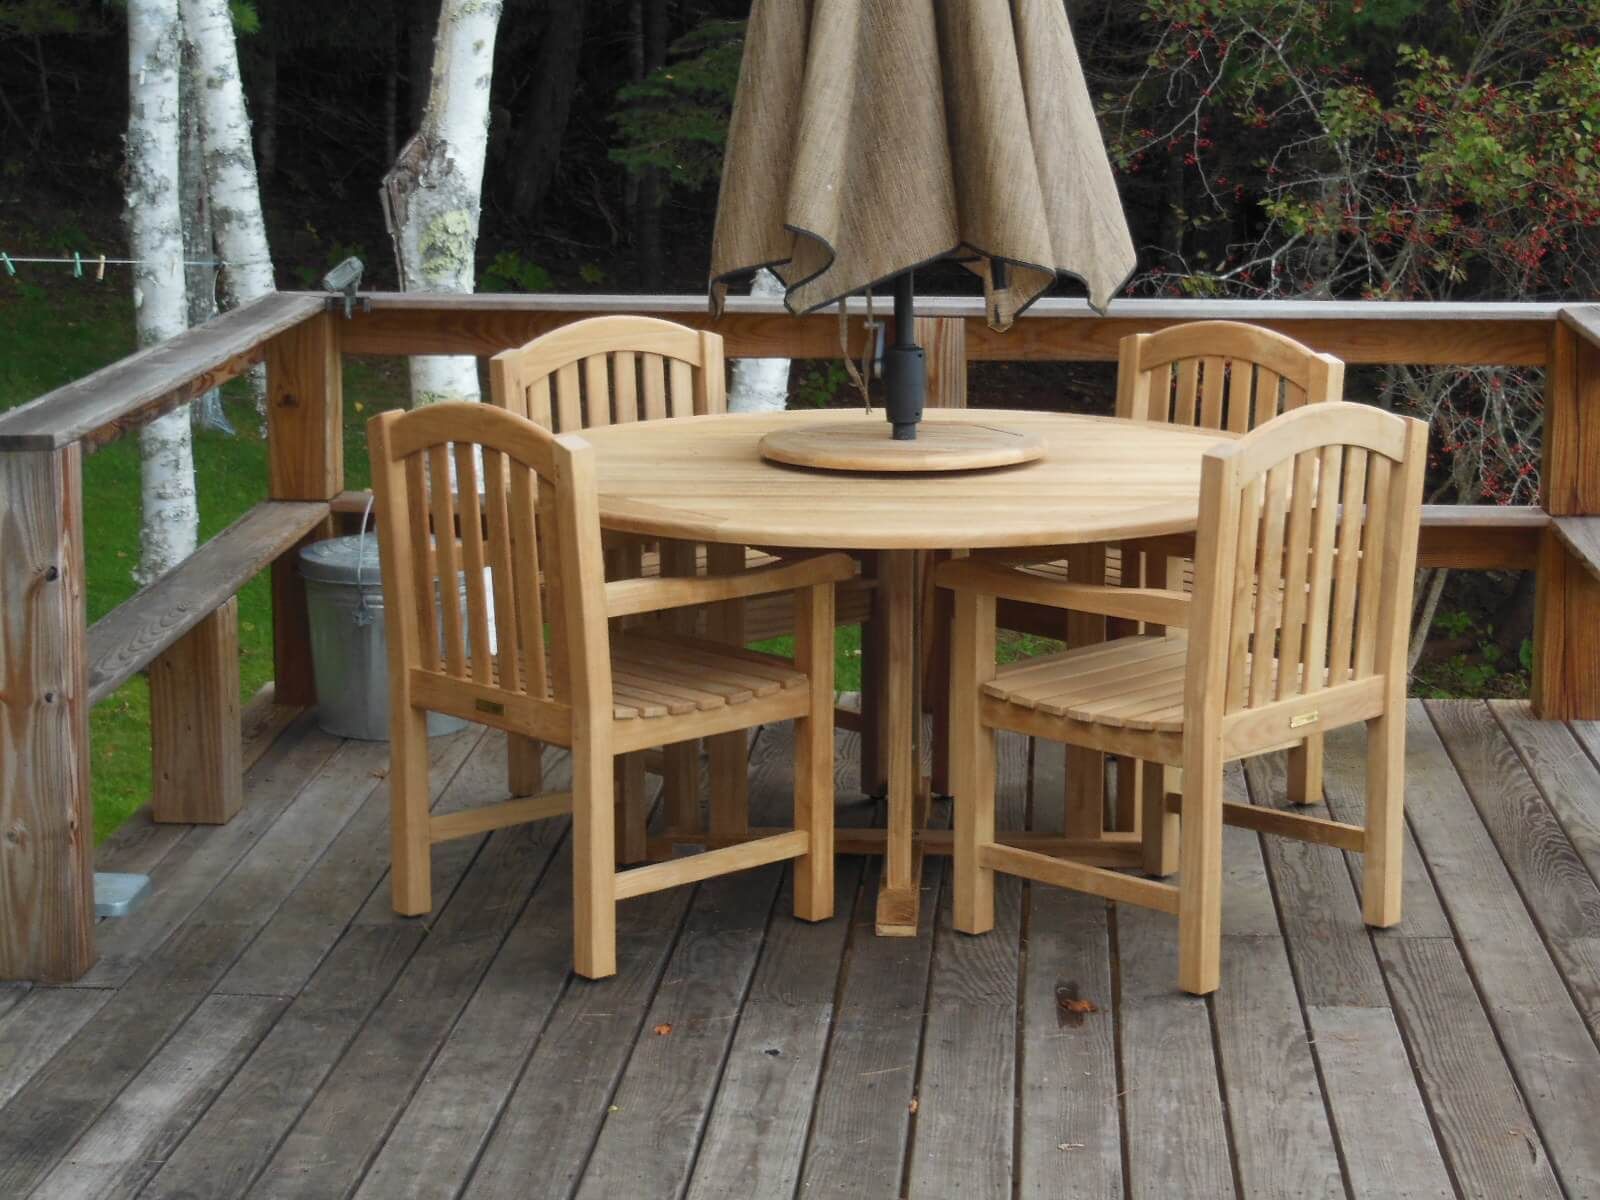 Teak Dining Table For 8: Ideal For Large Gatherings